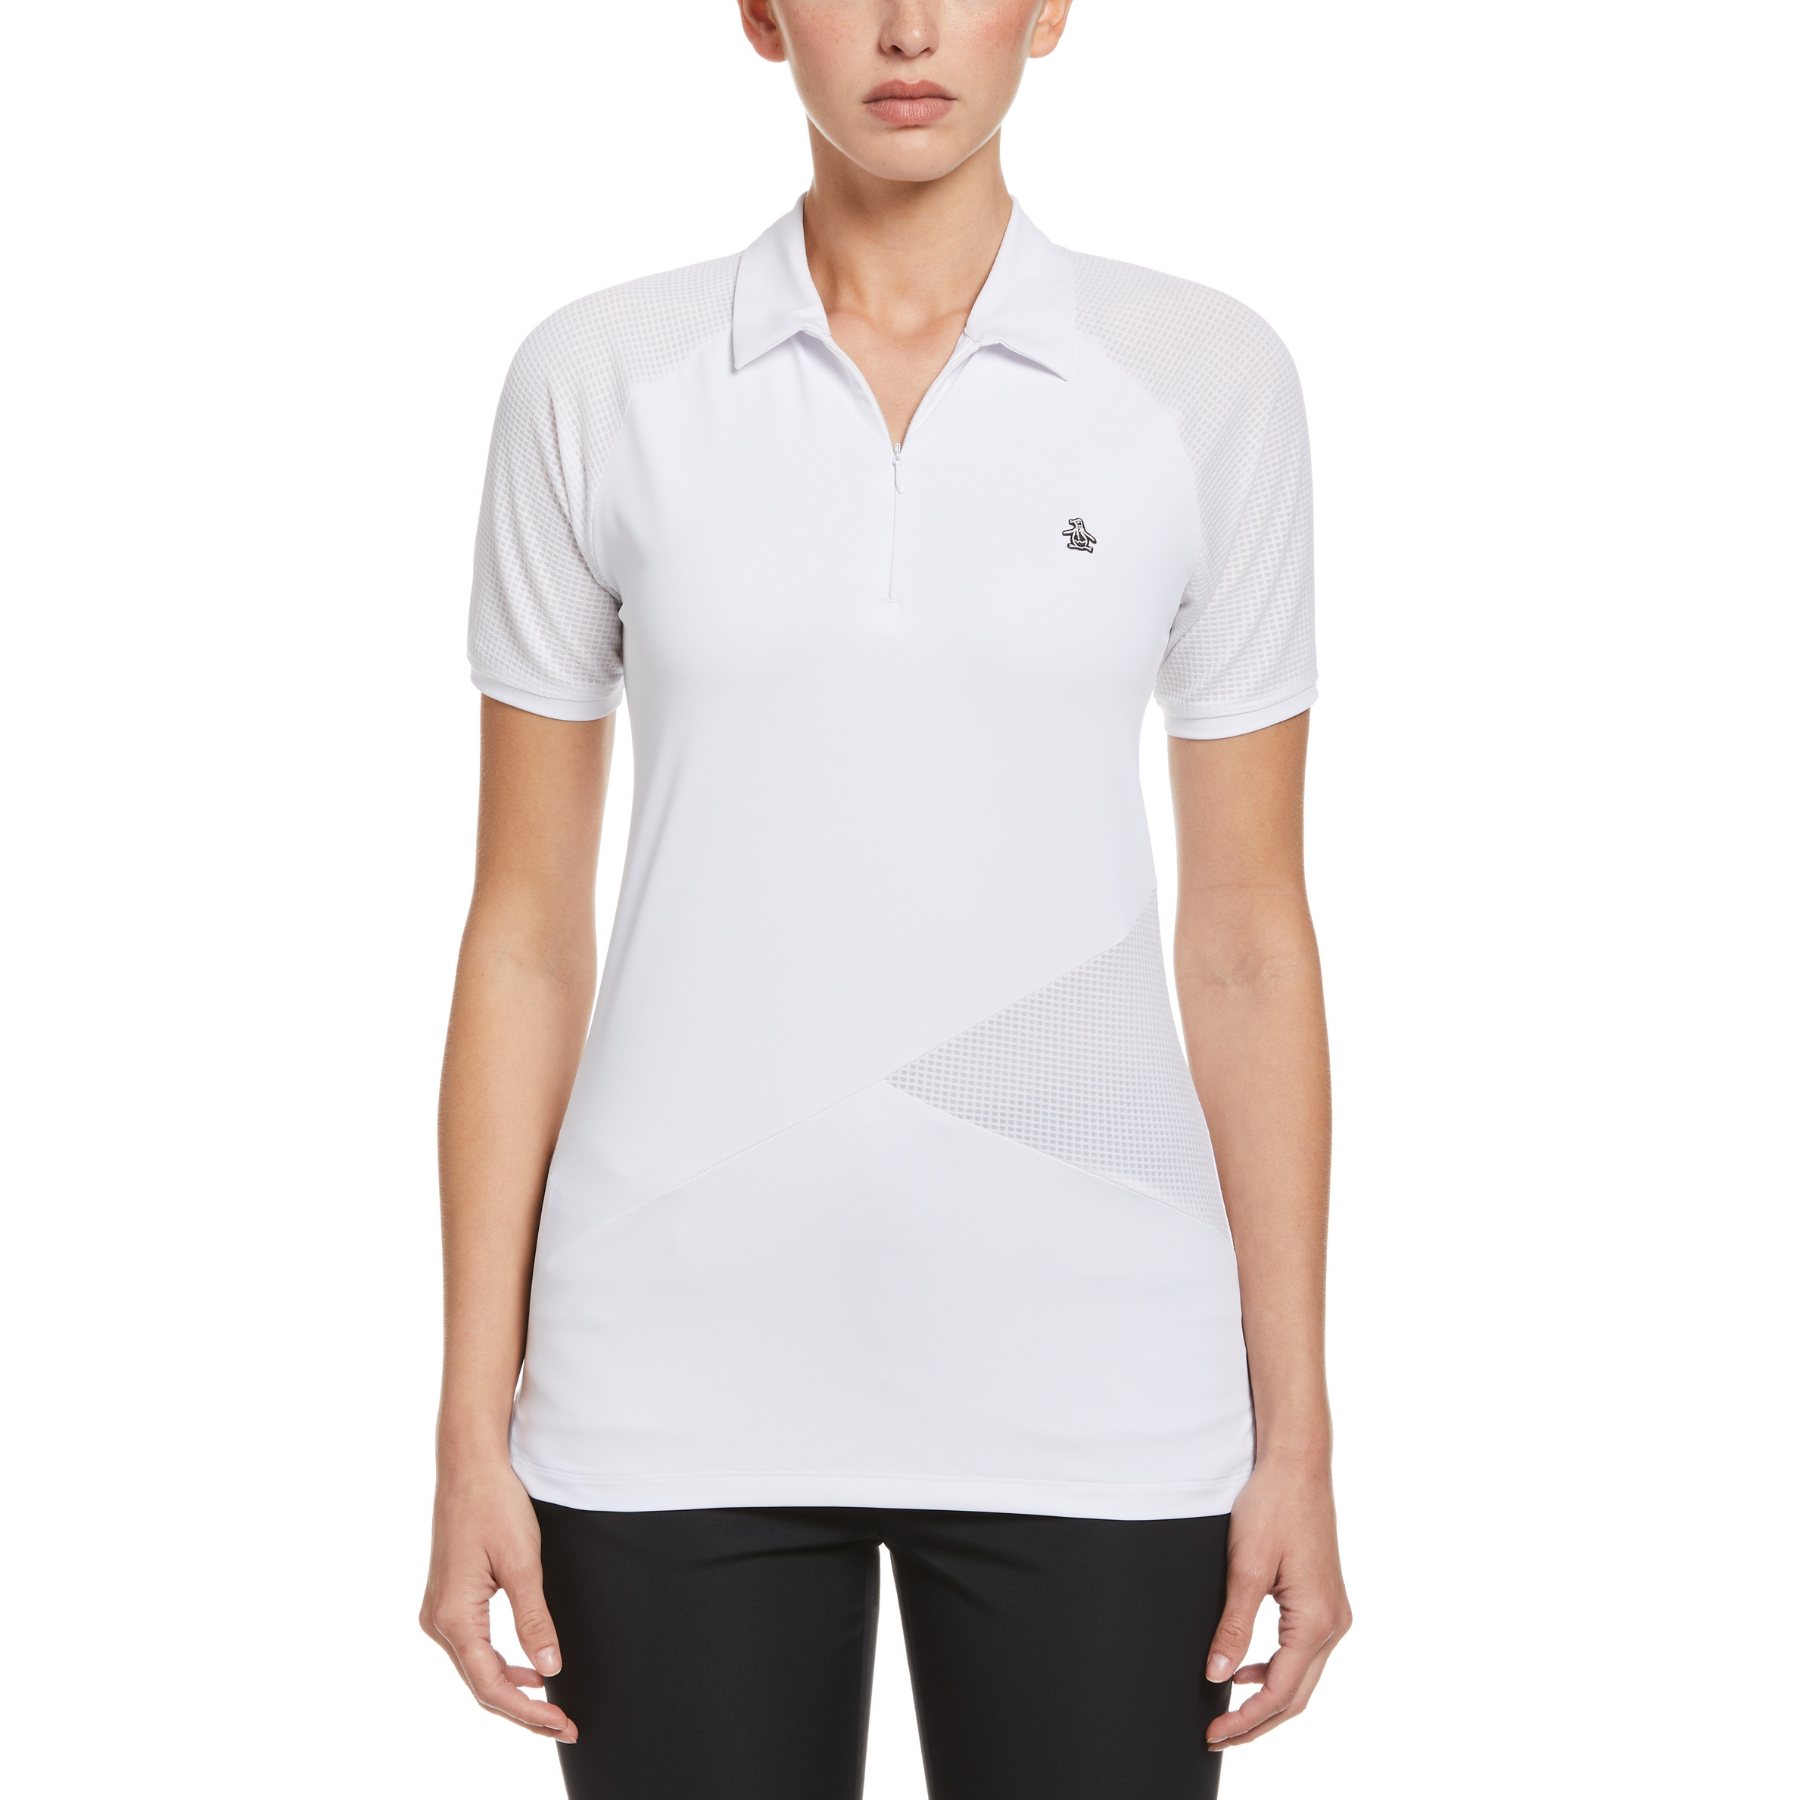 View Womens Zip Front Asymetrical Mesh Golf Polo Shirt In Bright White information